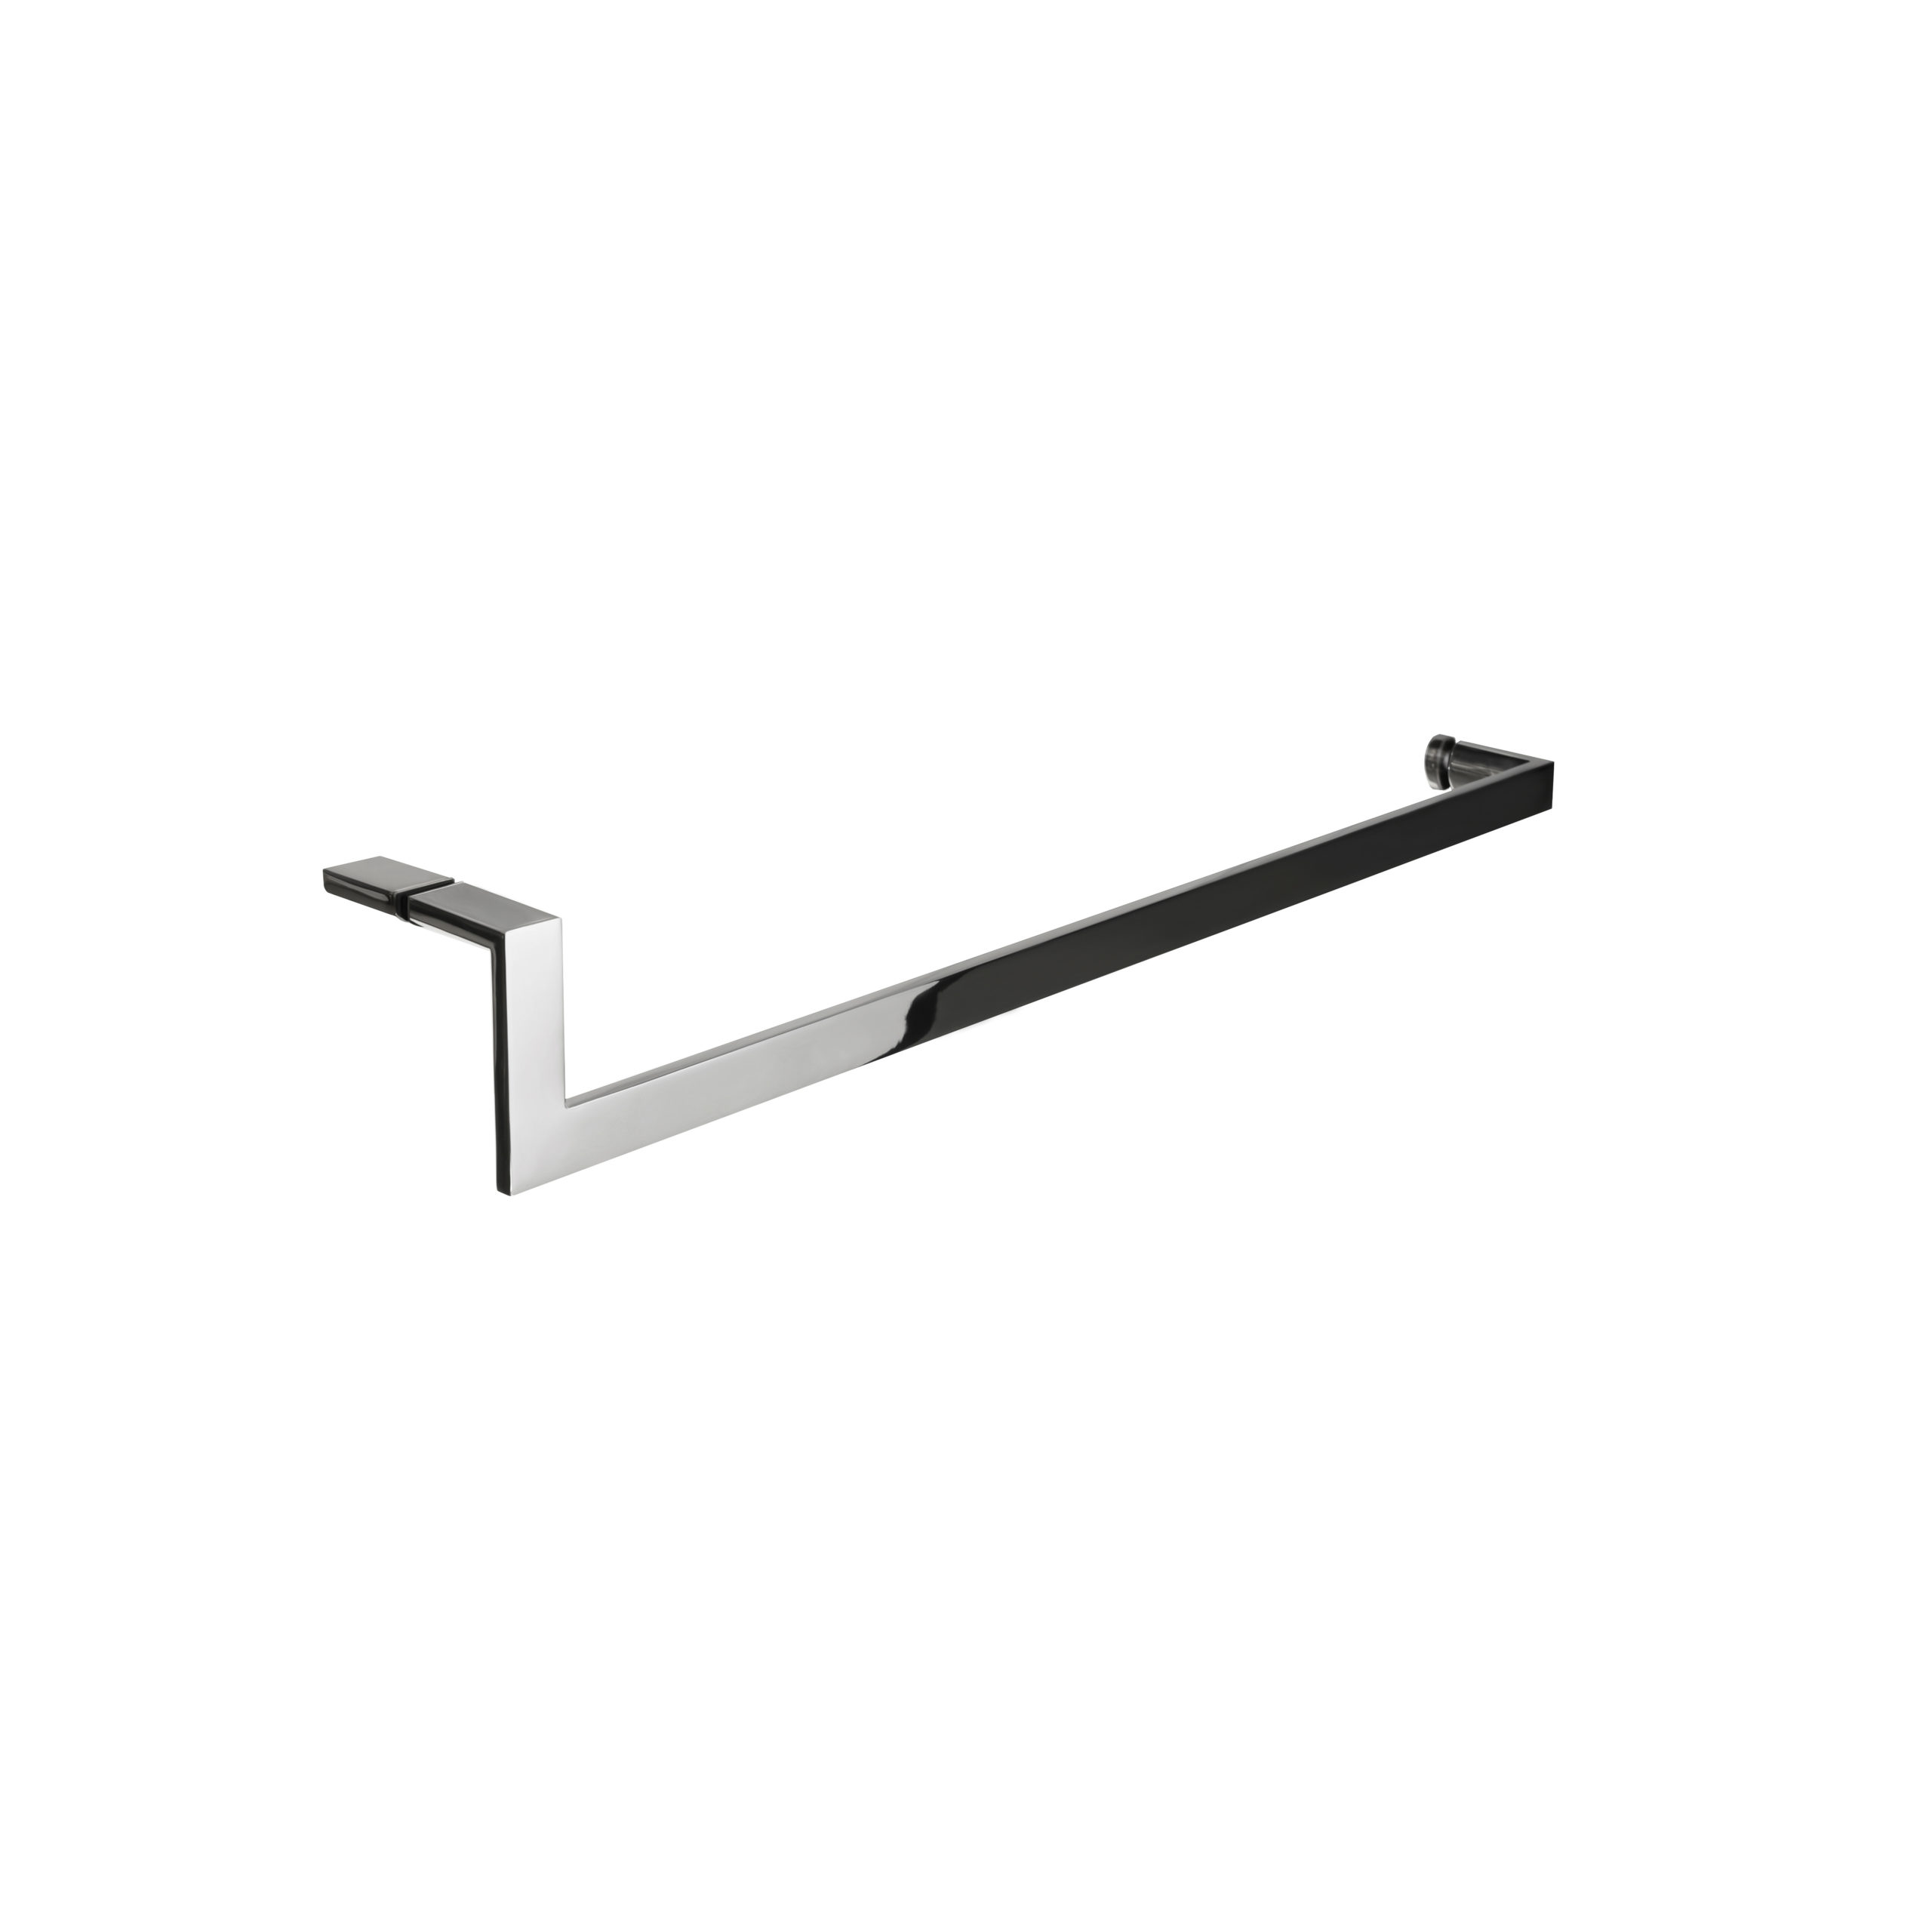 Polished stainless steel modern door handle and pull - towel bar - product featured image - 24 inch length - product SKU JP 402-5 PSS